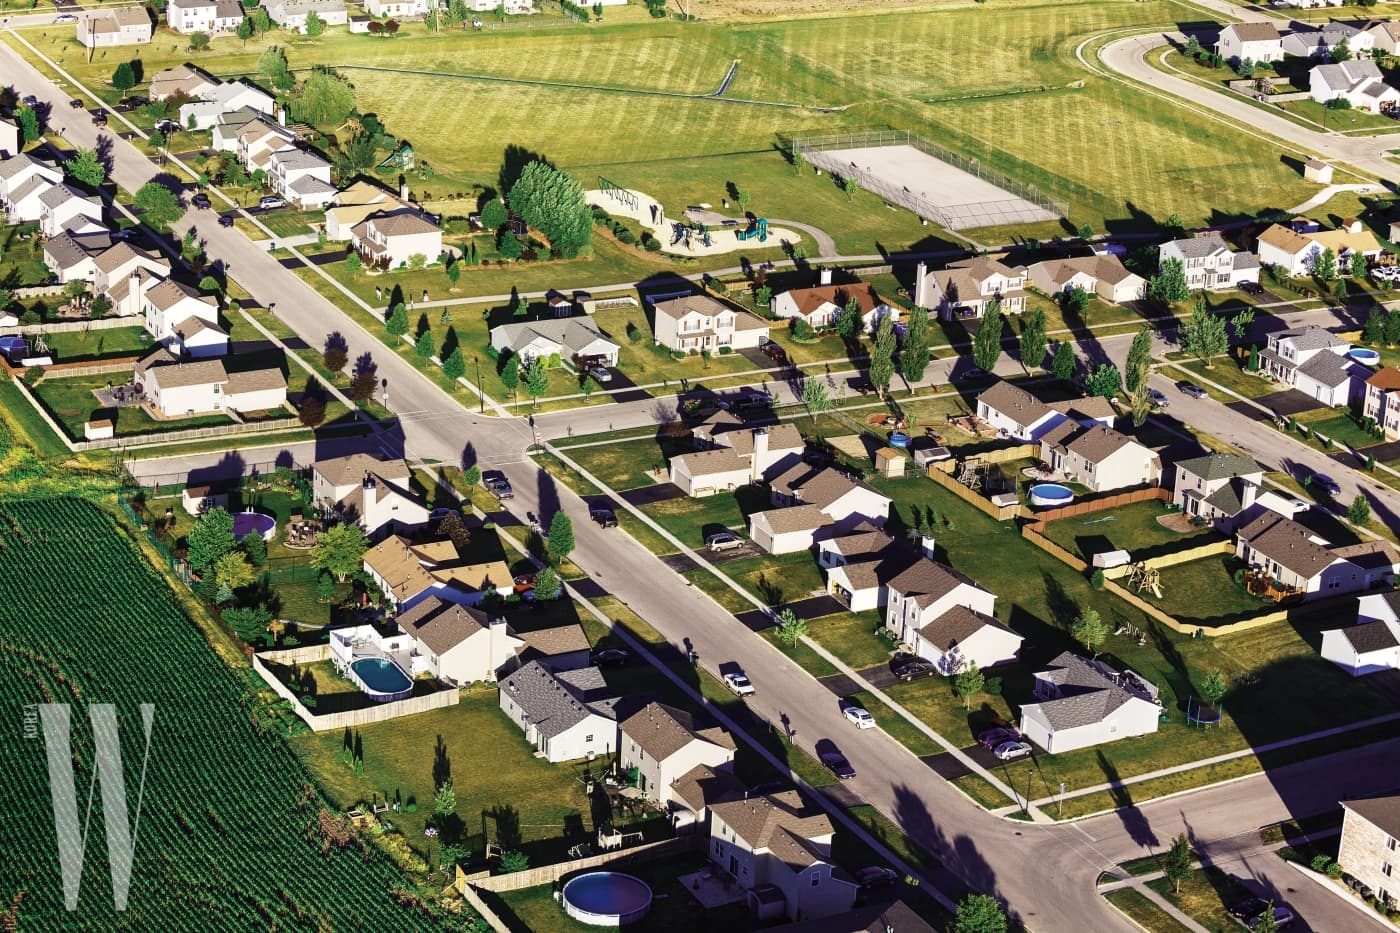 Aerial View of New Houses in Northern Illinois. Town Houses in new development.